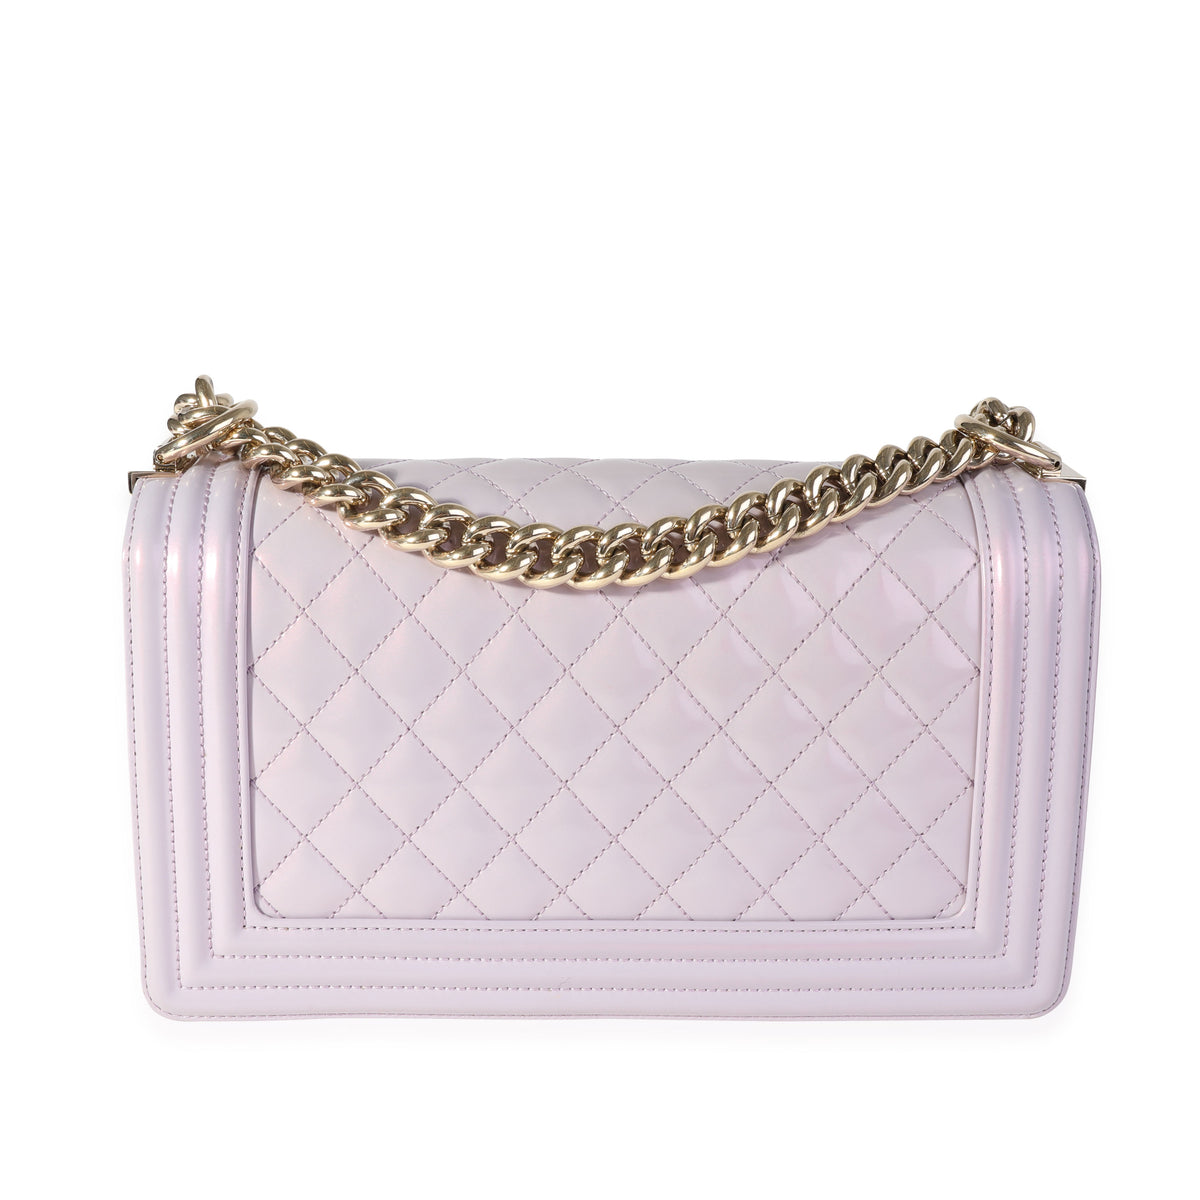 Chanel Purple Quilted Patent Leather Old Medium Boy Bag, myGemma, HK